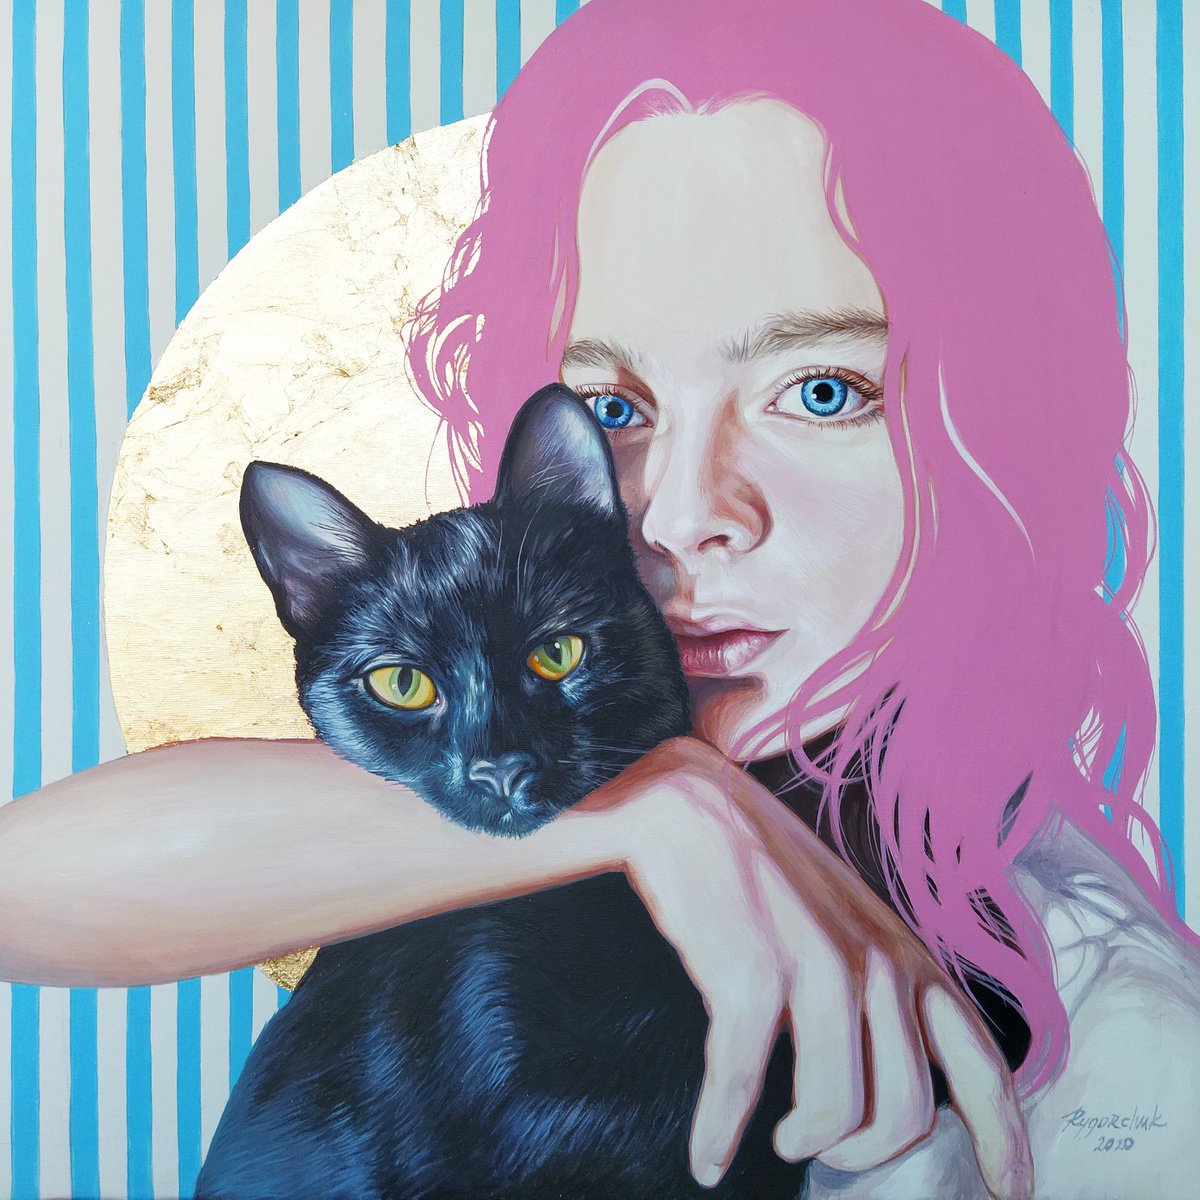 Portrait of a girl with a black cat by Lesja Rygorczuk